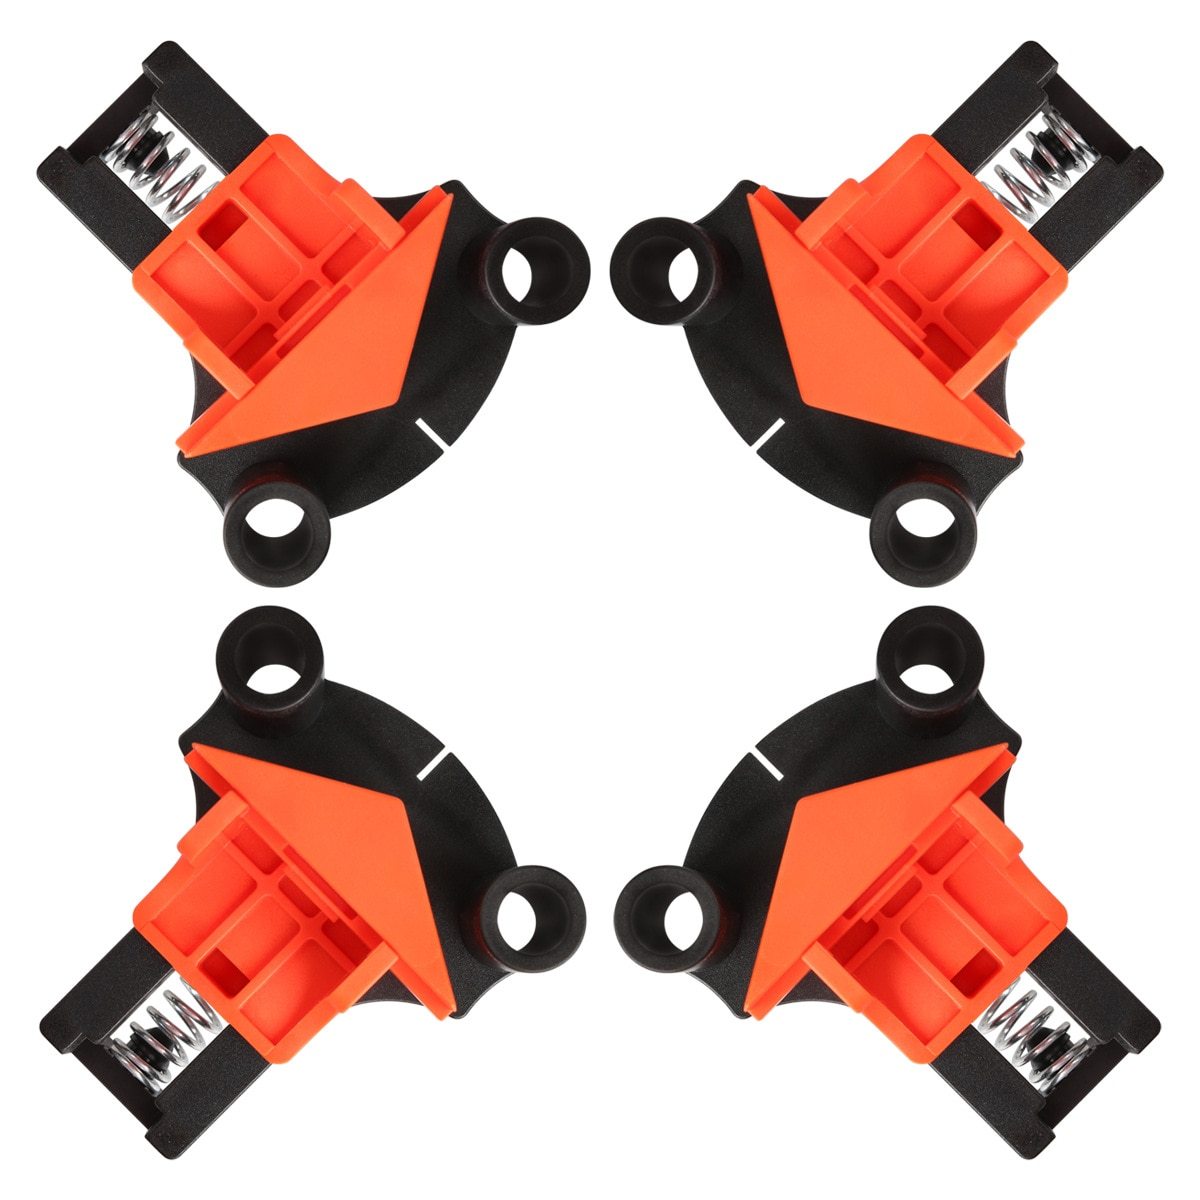 Last Day Promotion 48% OFF - Clamp set(👍BUY 2 SAVE $5&FREE SHIPPING NOW)